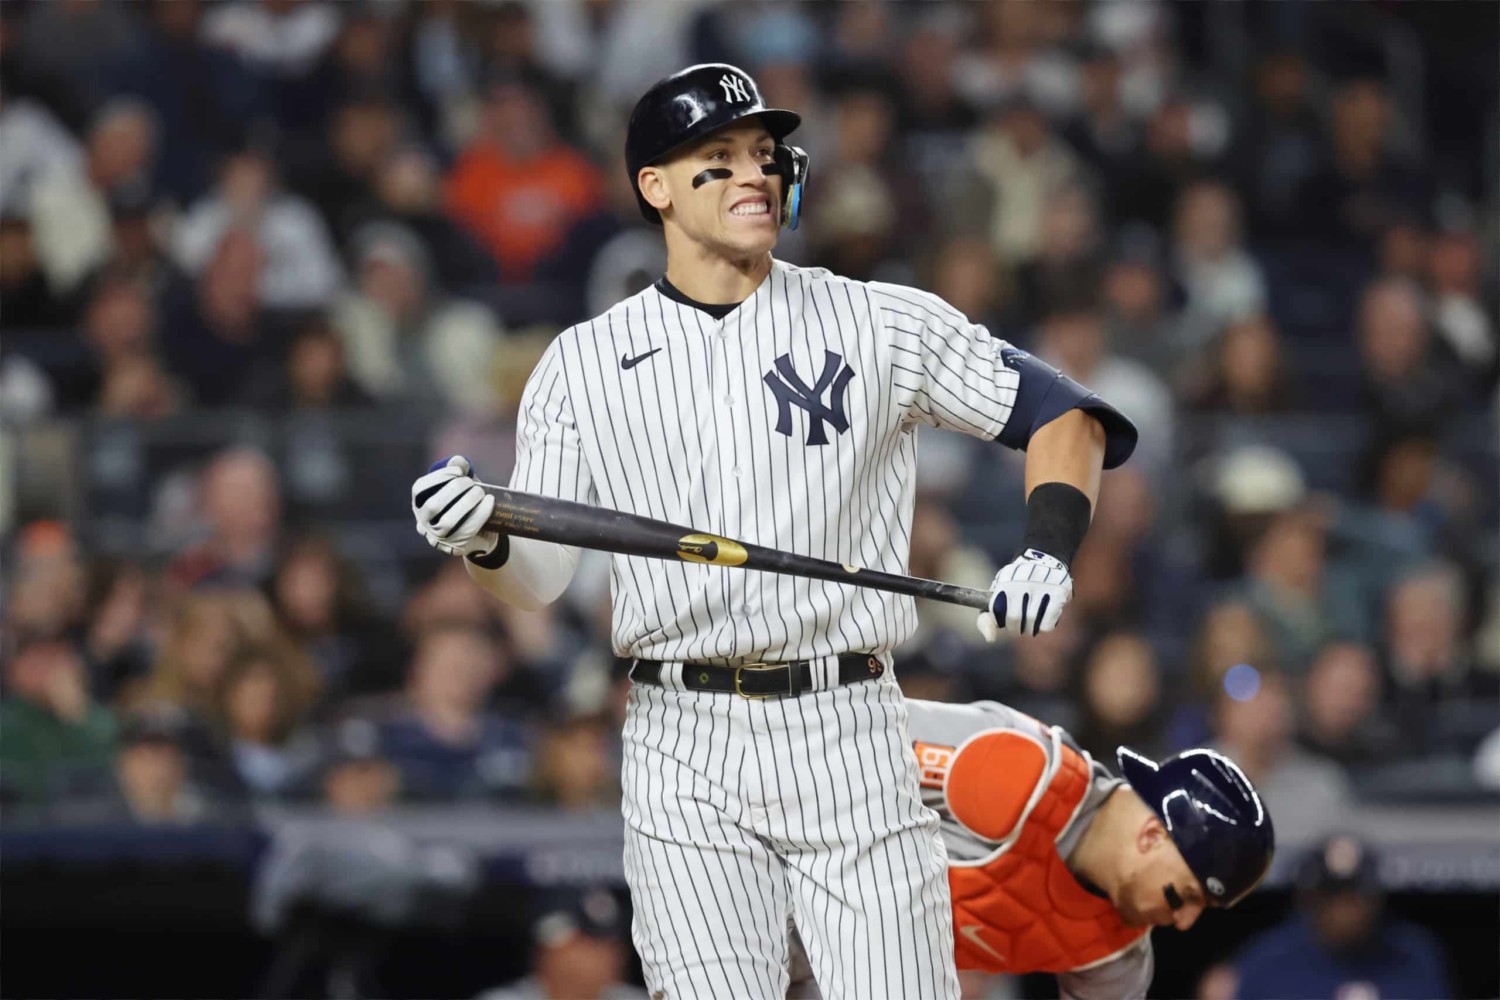 Aaron Judge Record Home Run Ball Sells for $1.5 Million